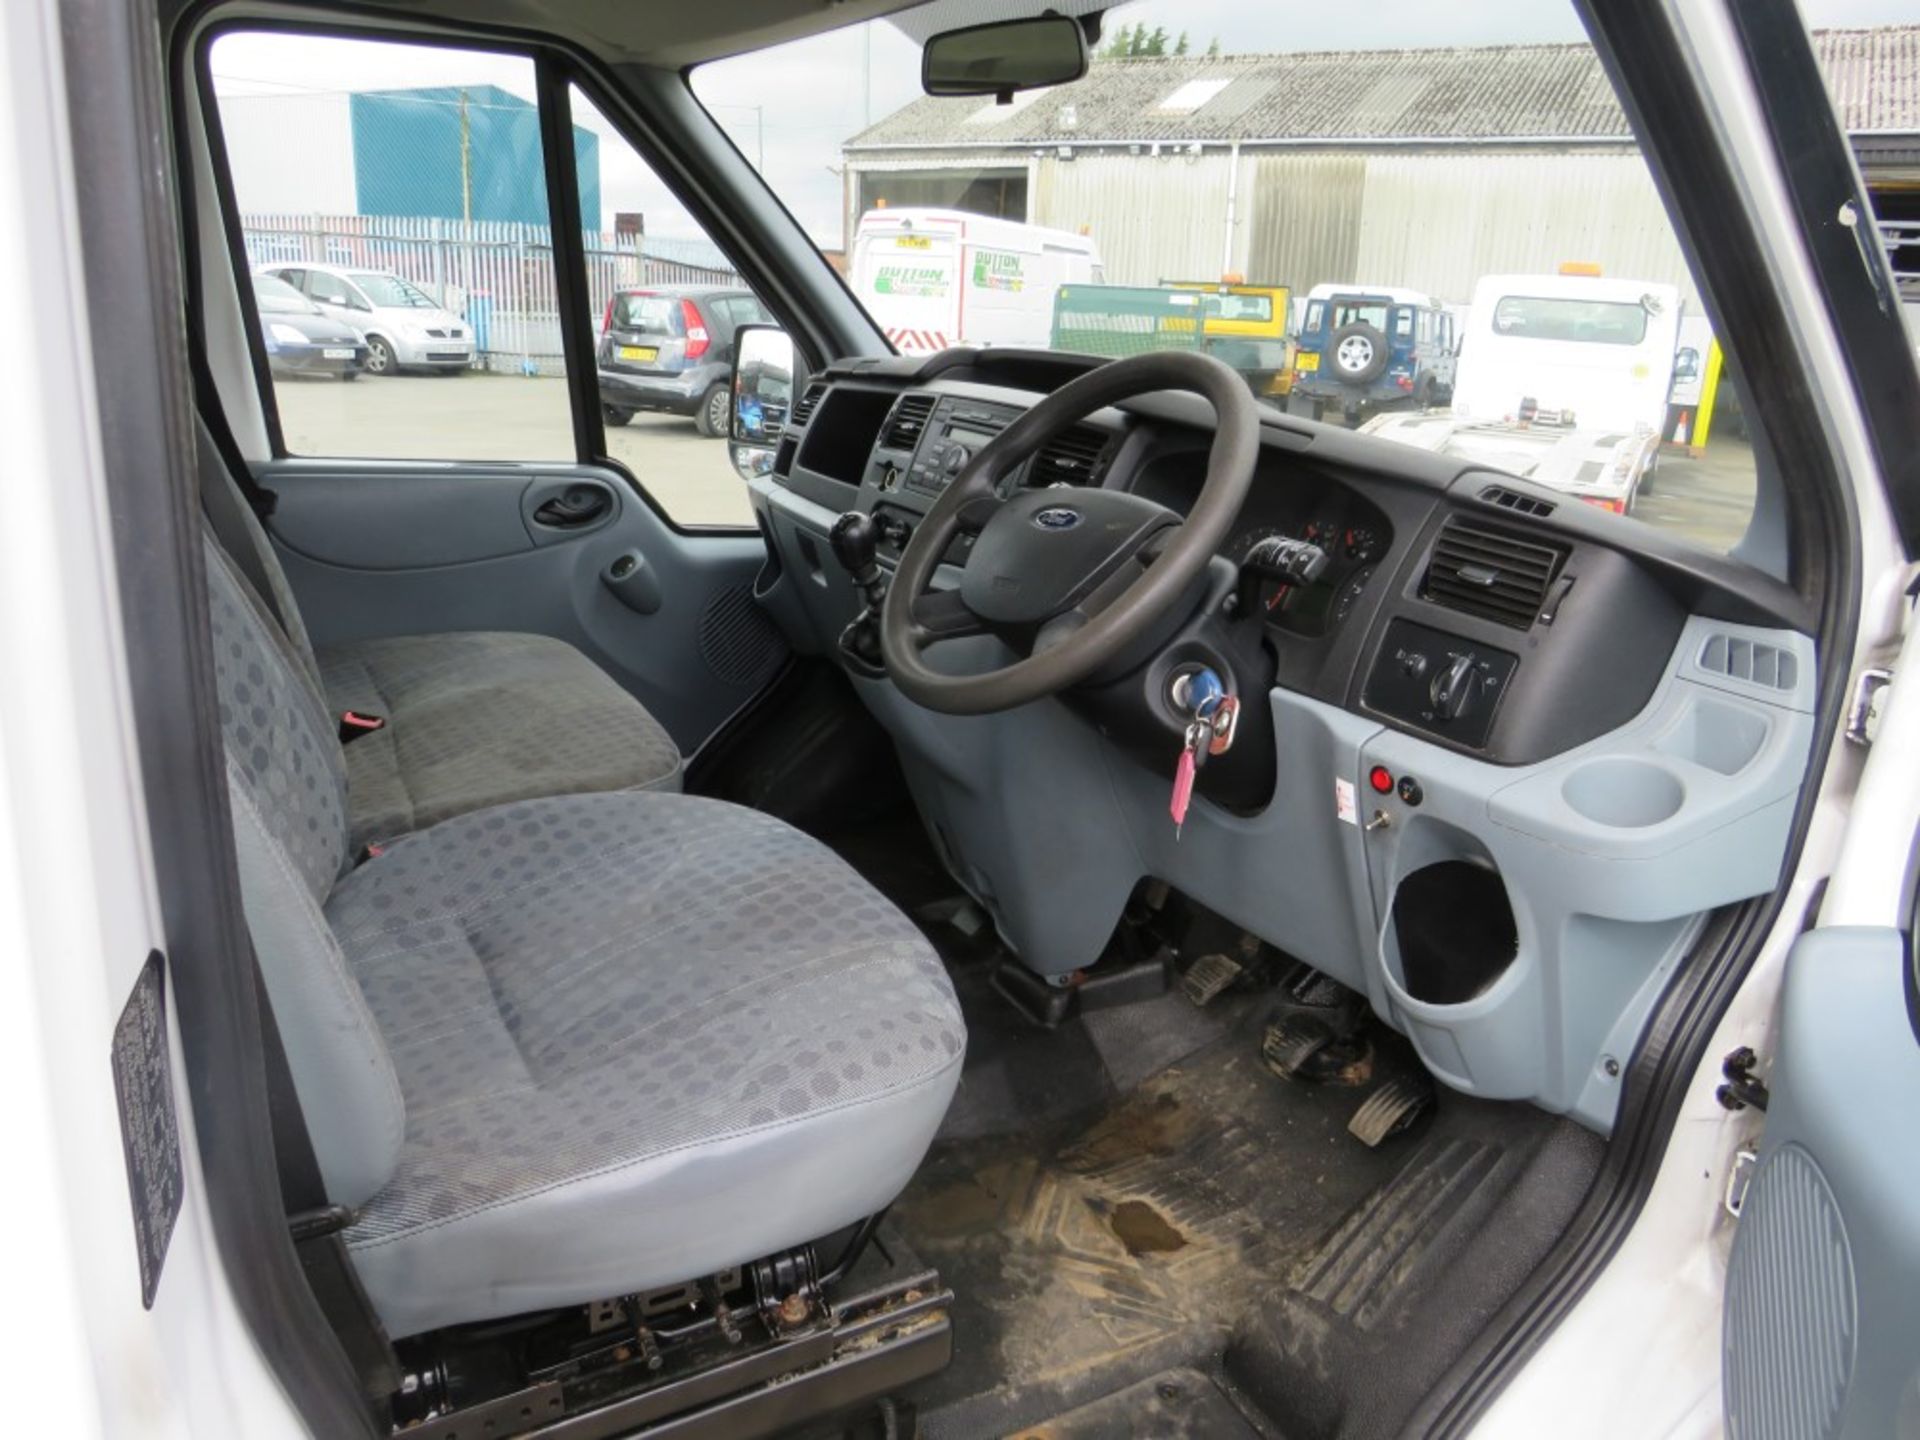 12 reg FORD TRANSIT 100 T350 DOUBLE CAB CAGED TIPPER, 1ST REG 08/12, TEST 08/21, 108655M - Image 5 of 6